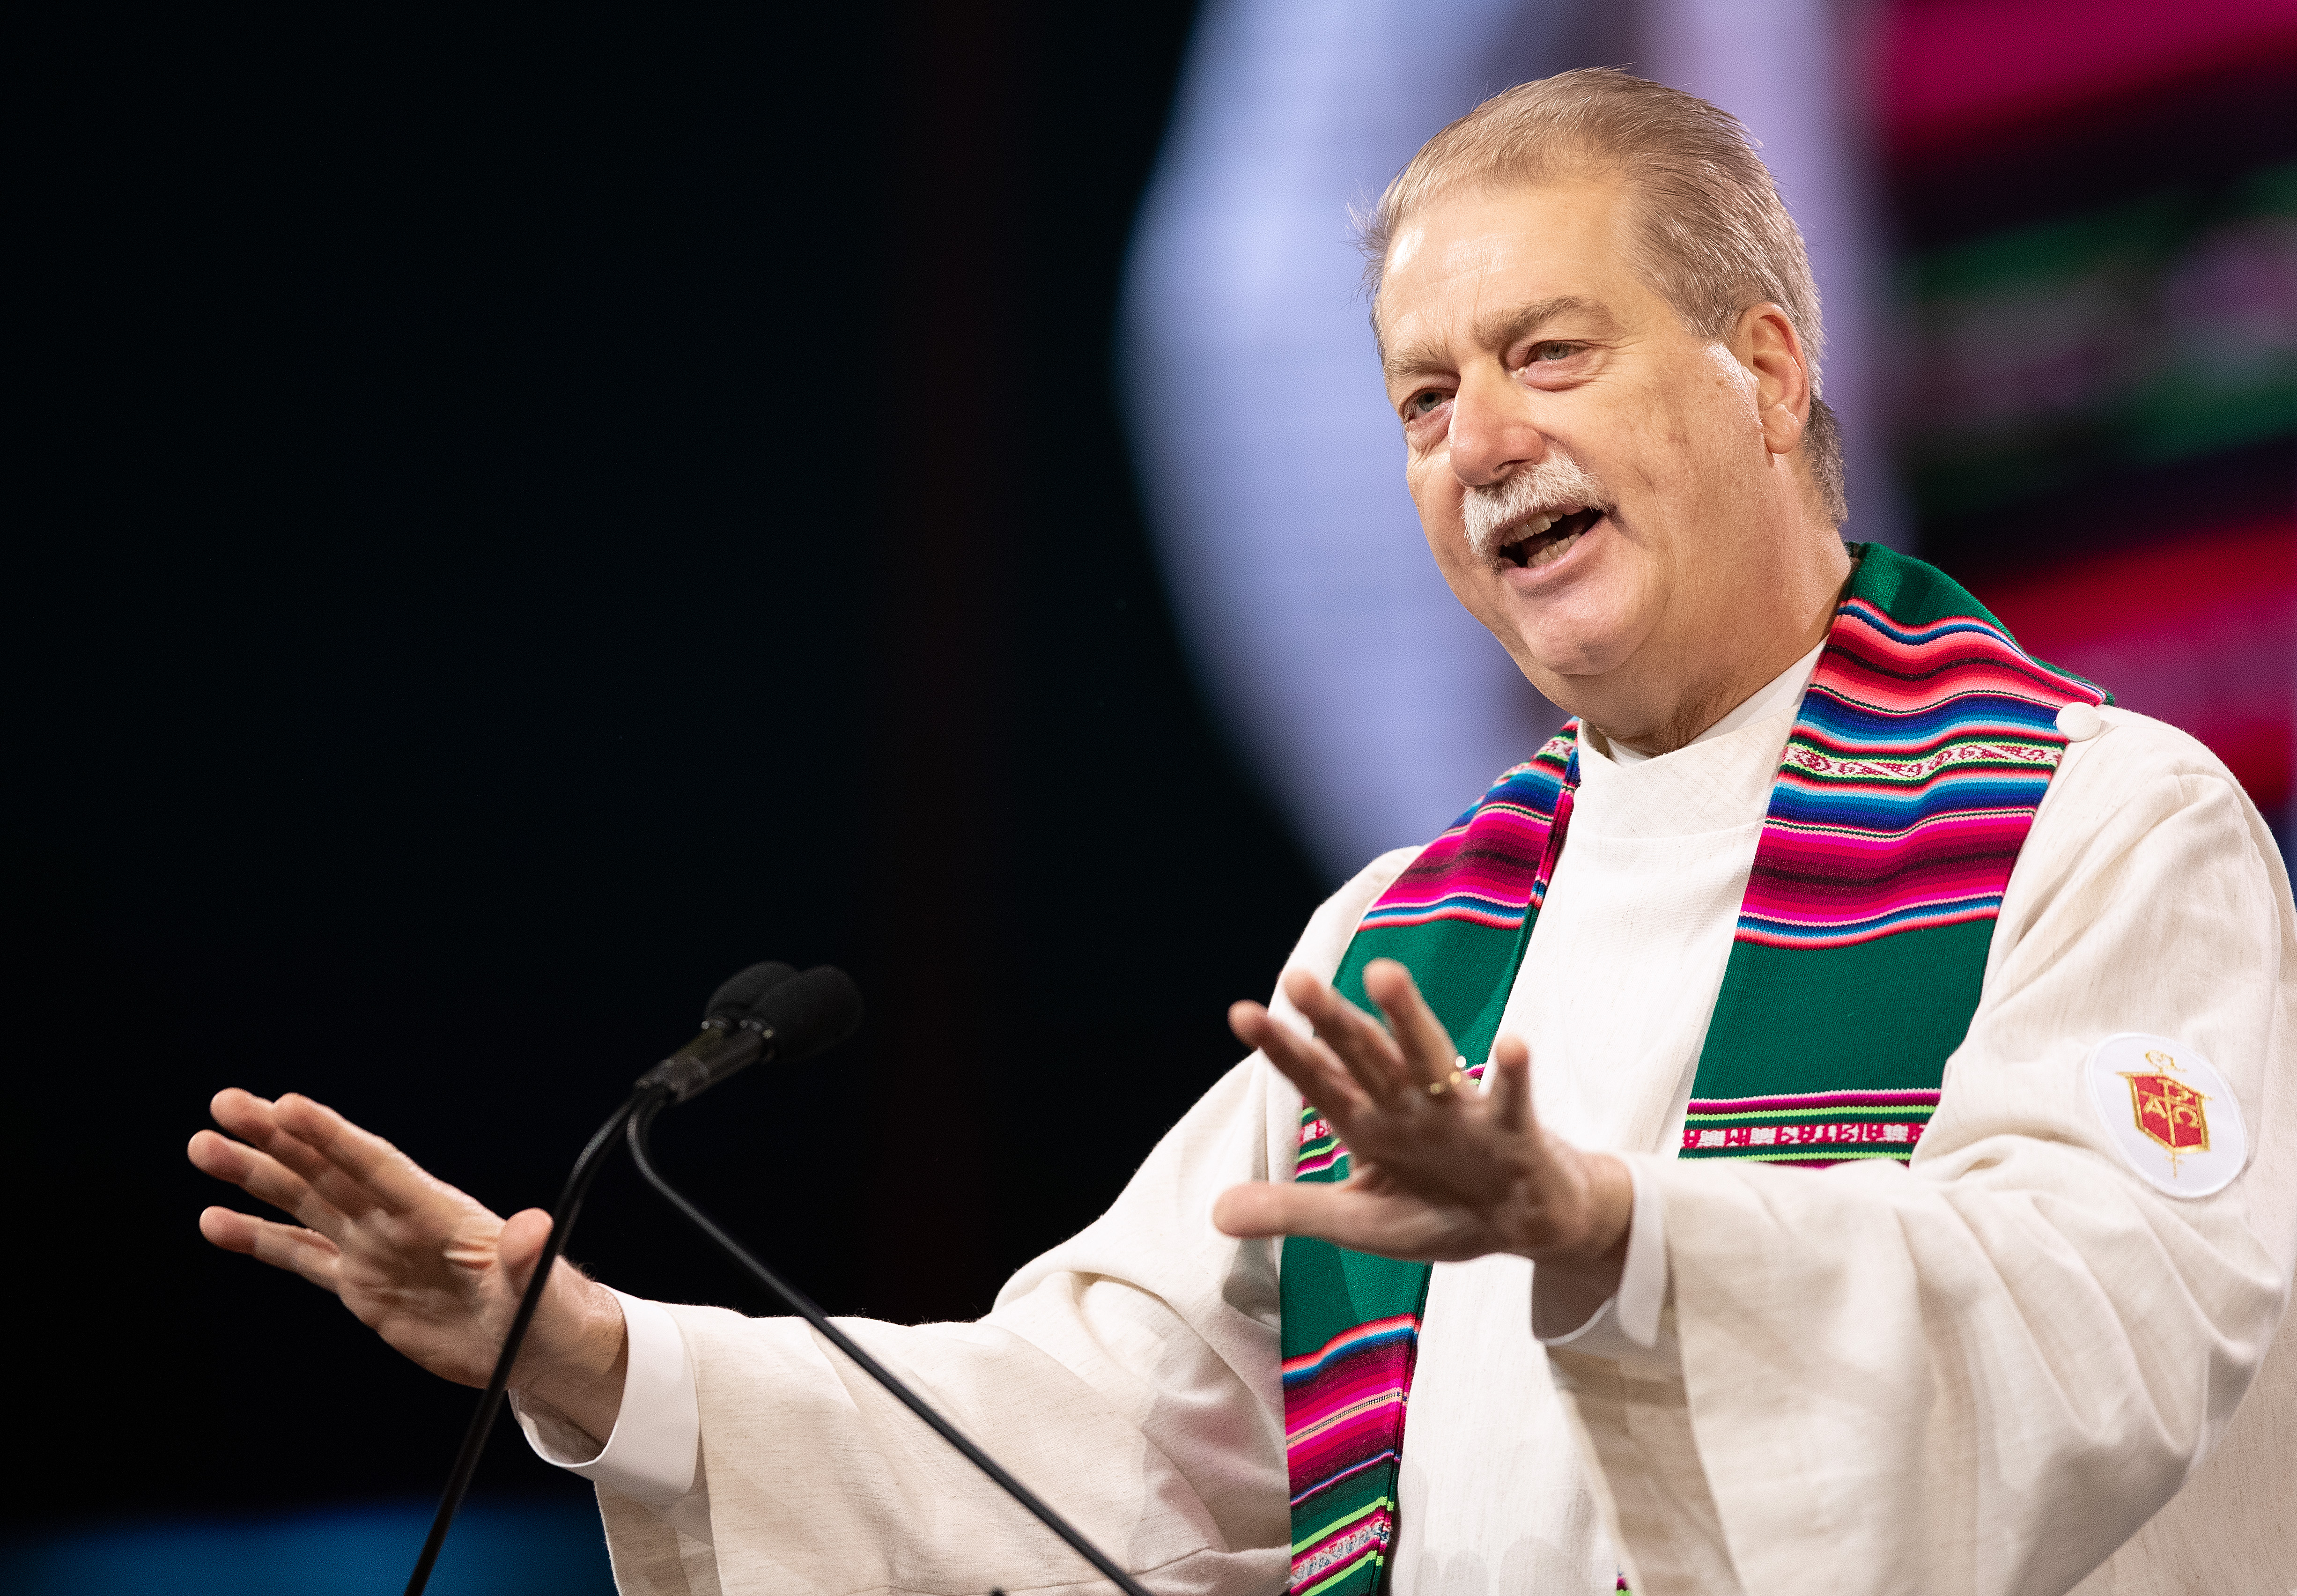 Bishop Kenneth H. Carter opens the second day of the 2019 General Conference with a sermon on the mission of the church. Photo by Mike DuBose, UMNS.